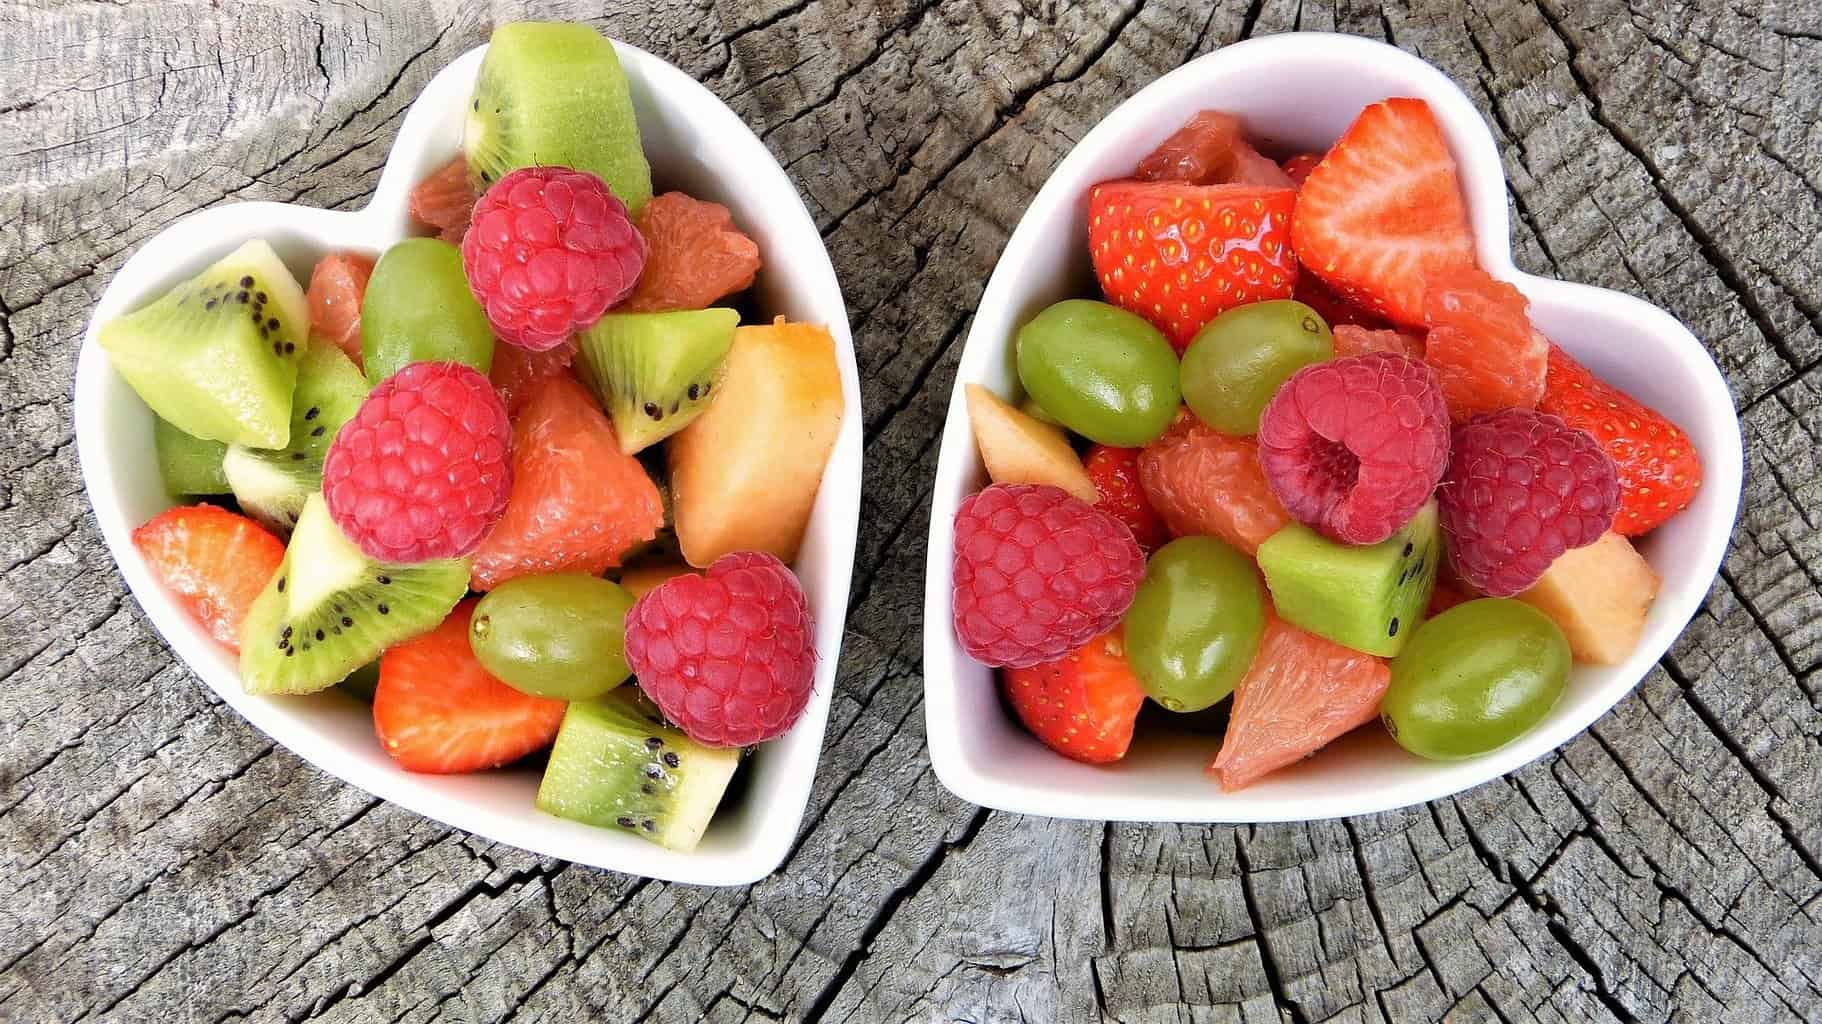 How and Which Fruits to Use When Managing Weight